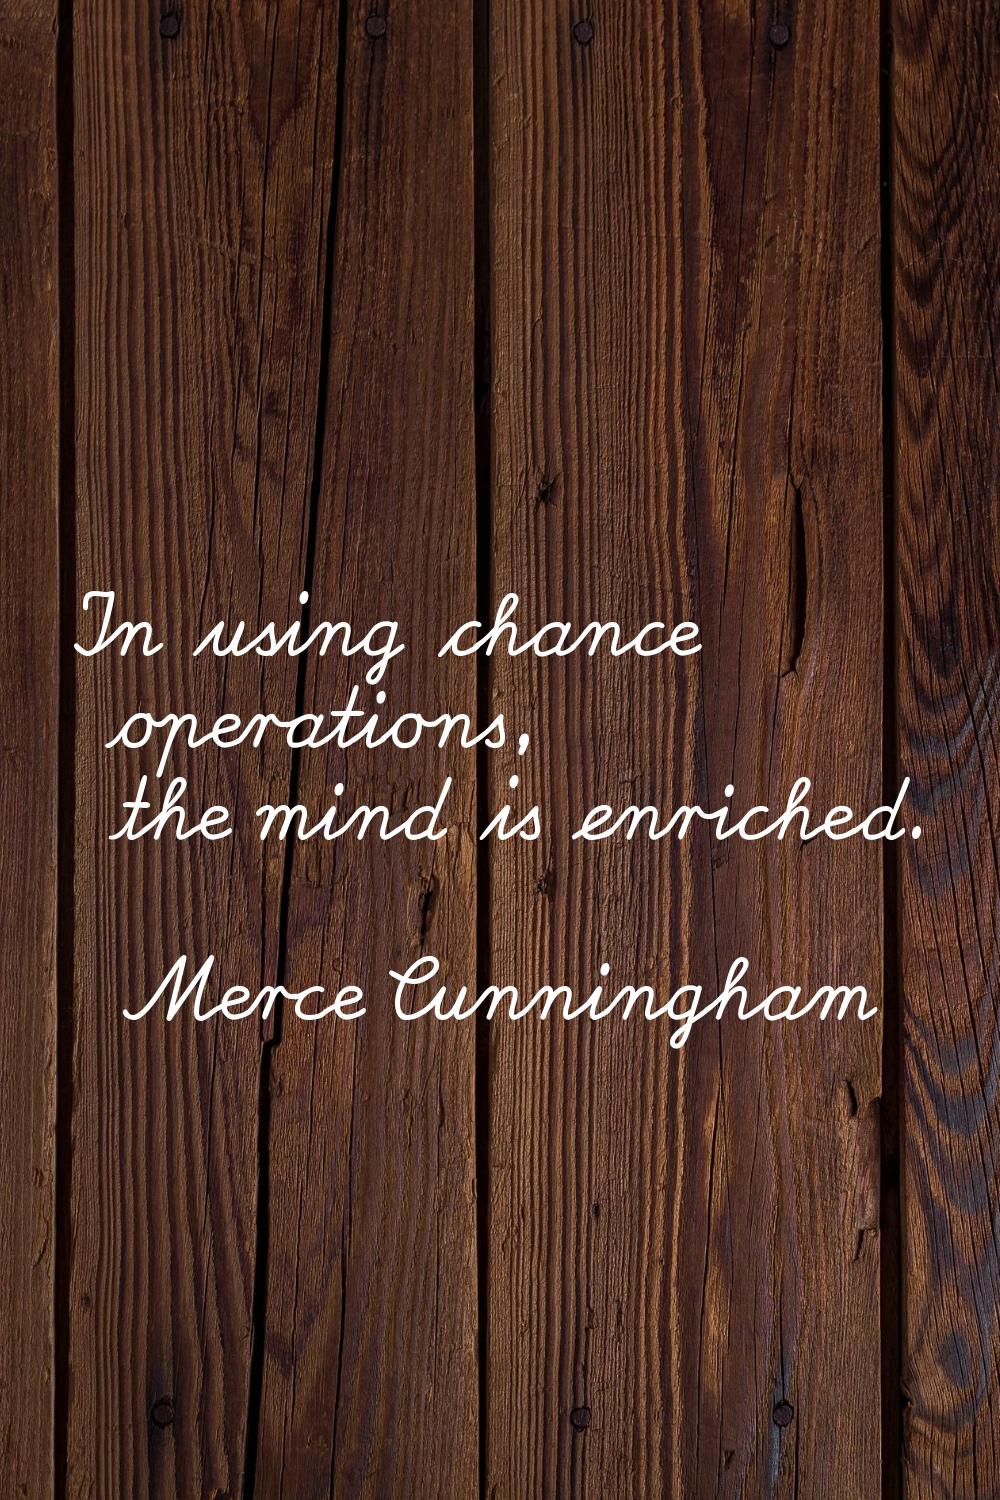 In using chance operations, the mind is enriched.